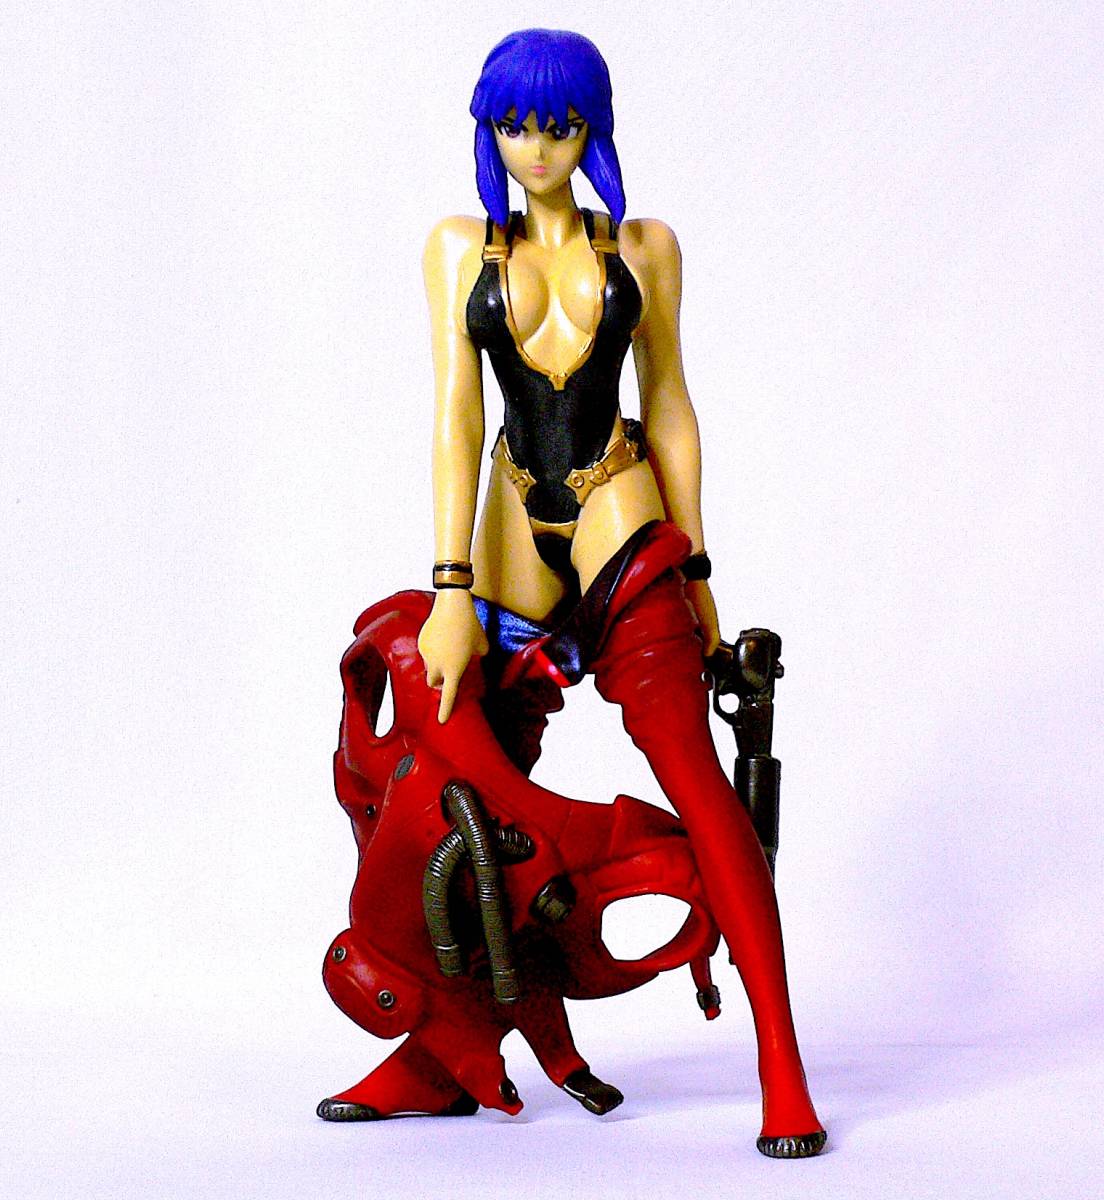 ALPHA Vice 草薙素子 DIVER DOWN Ghost in the Shell 攻殻機動隊 Ghost in the Shell 塗装済み完成品 全高約17cm 箱なし_画像1